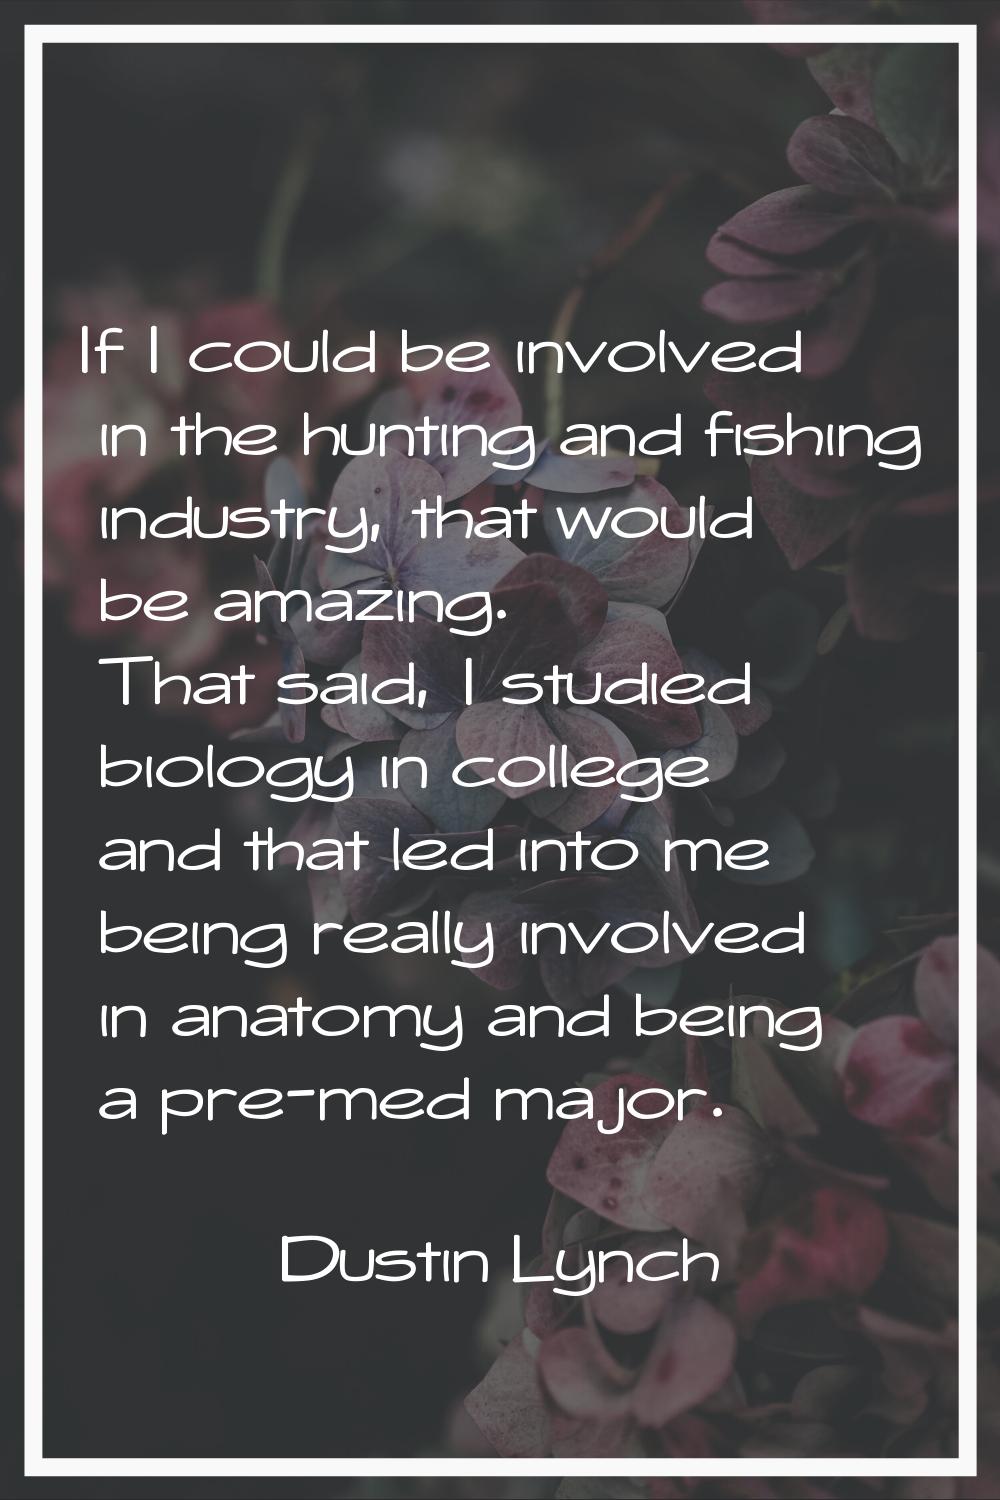 If I could be involved in the hunting and fishing industry, that would be amazing. That said, I stu